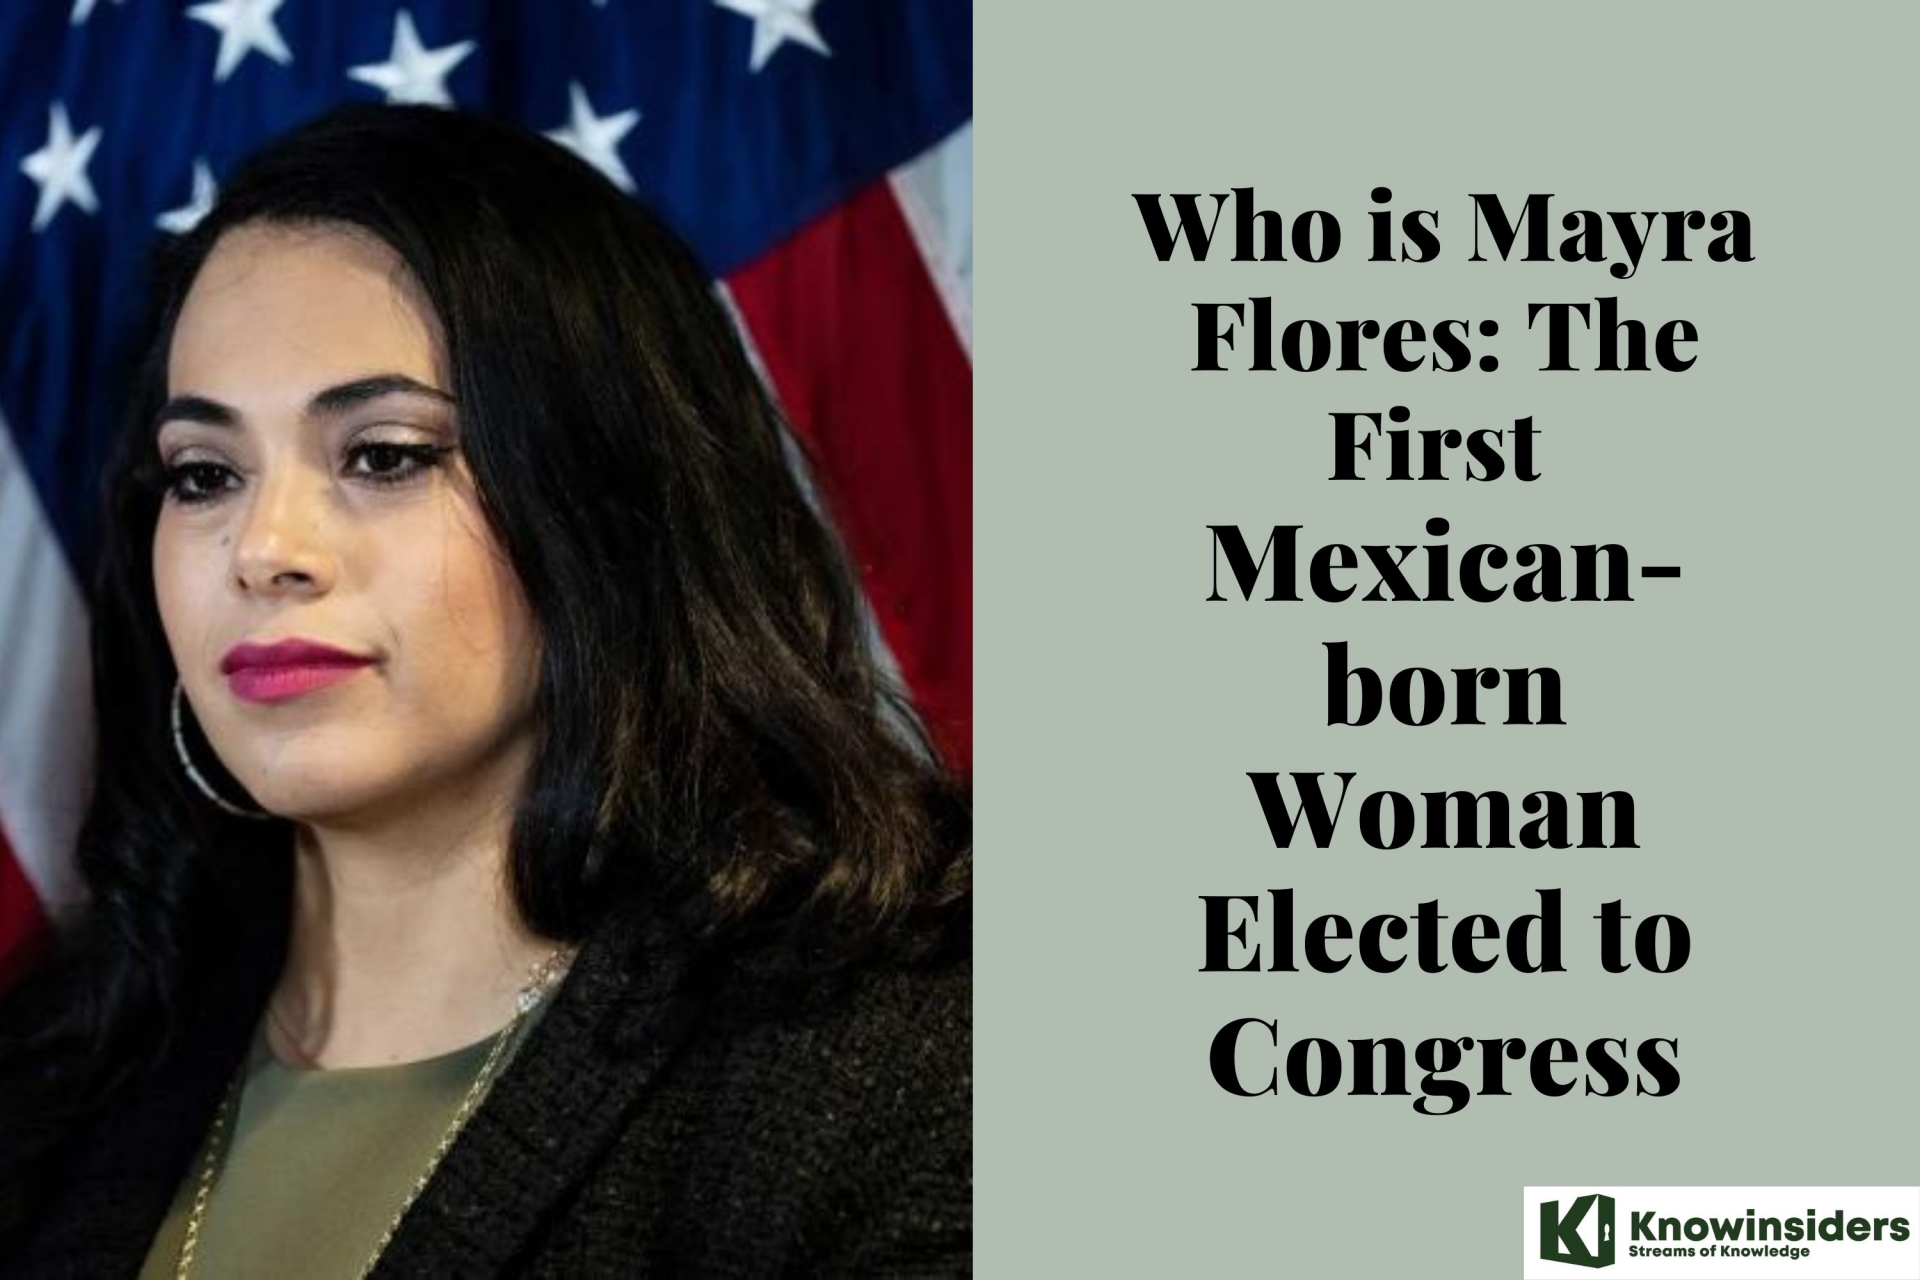 Who is Mayra Flores: The First Mexican-born Woman Elected to Congress